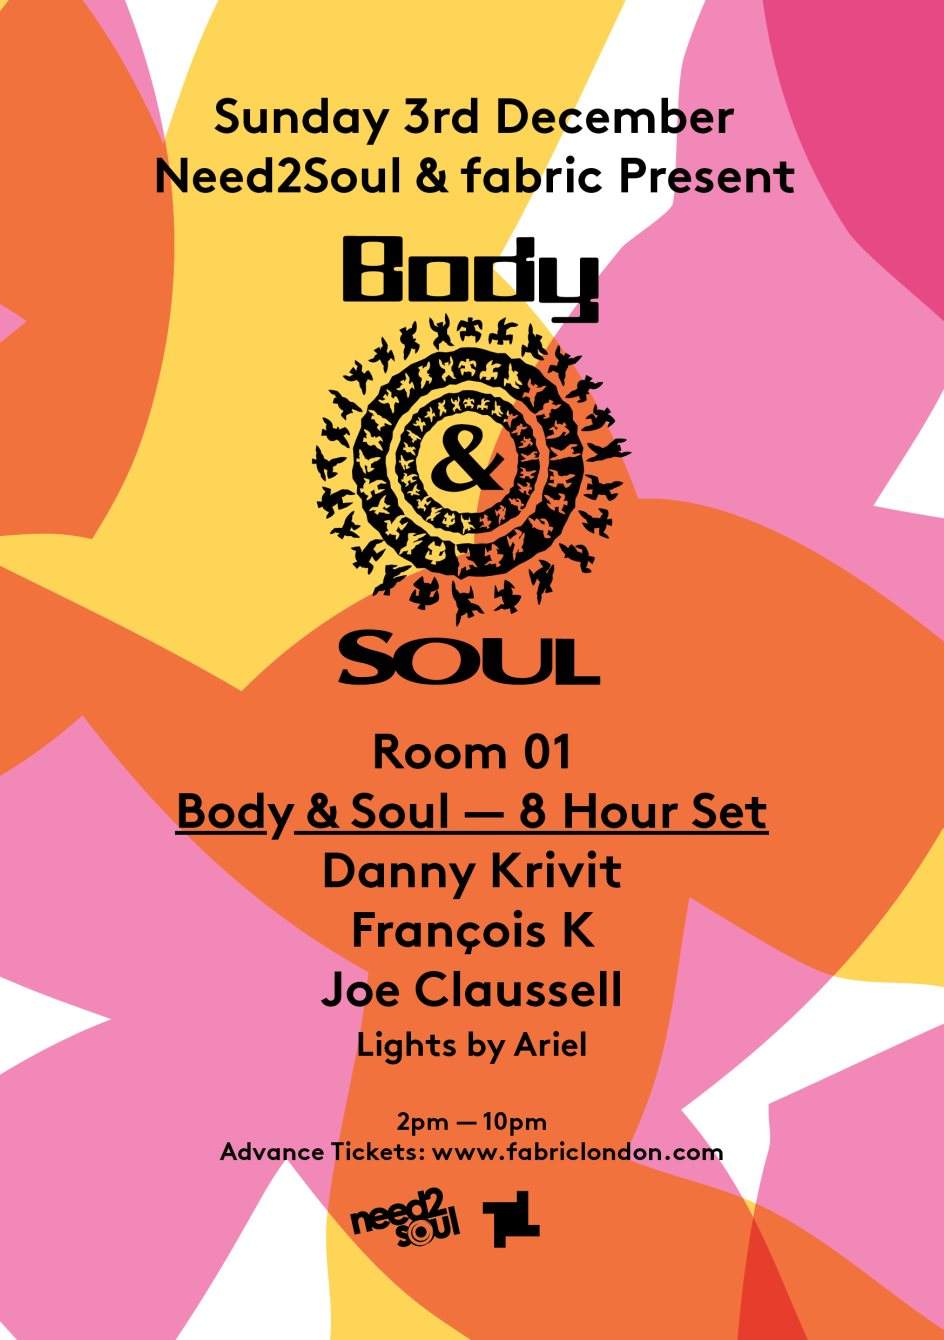 Need2soul & fabric present: Body & Soul - Flyer front